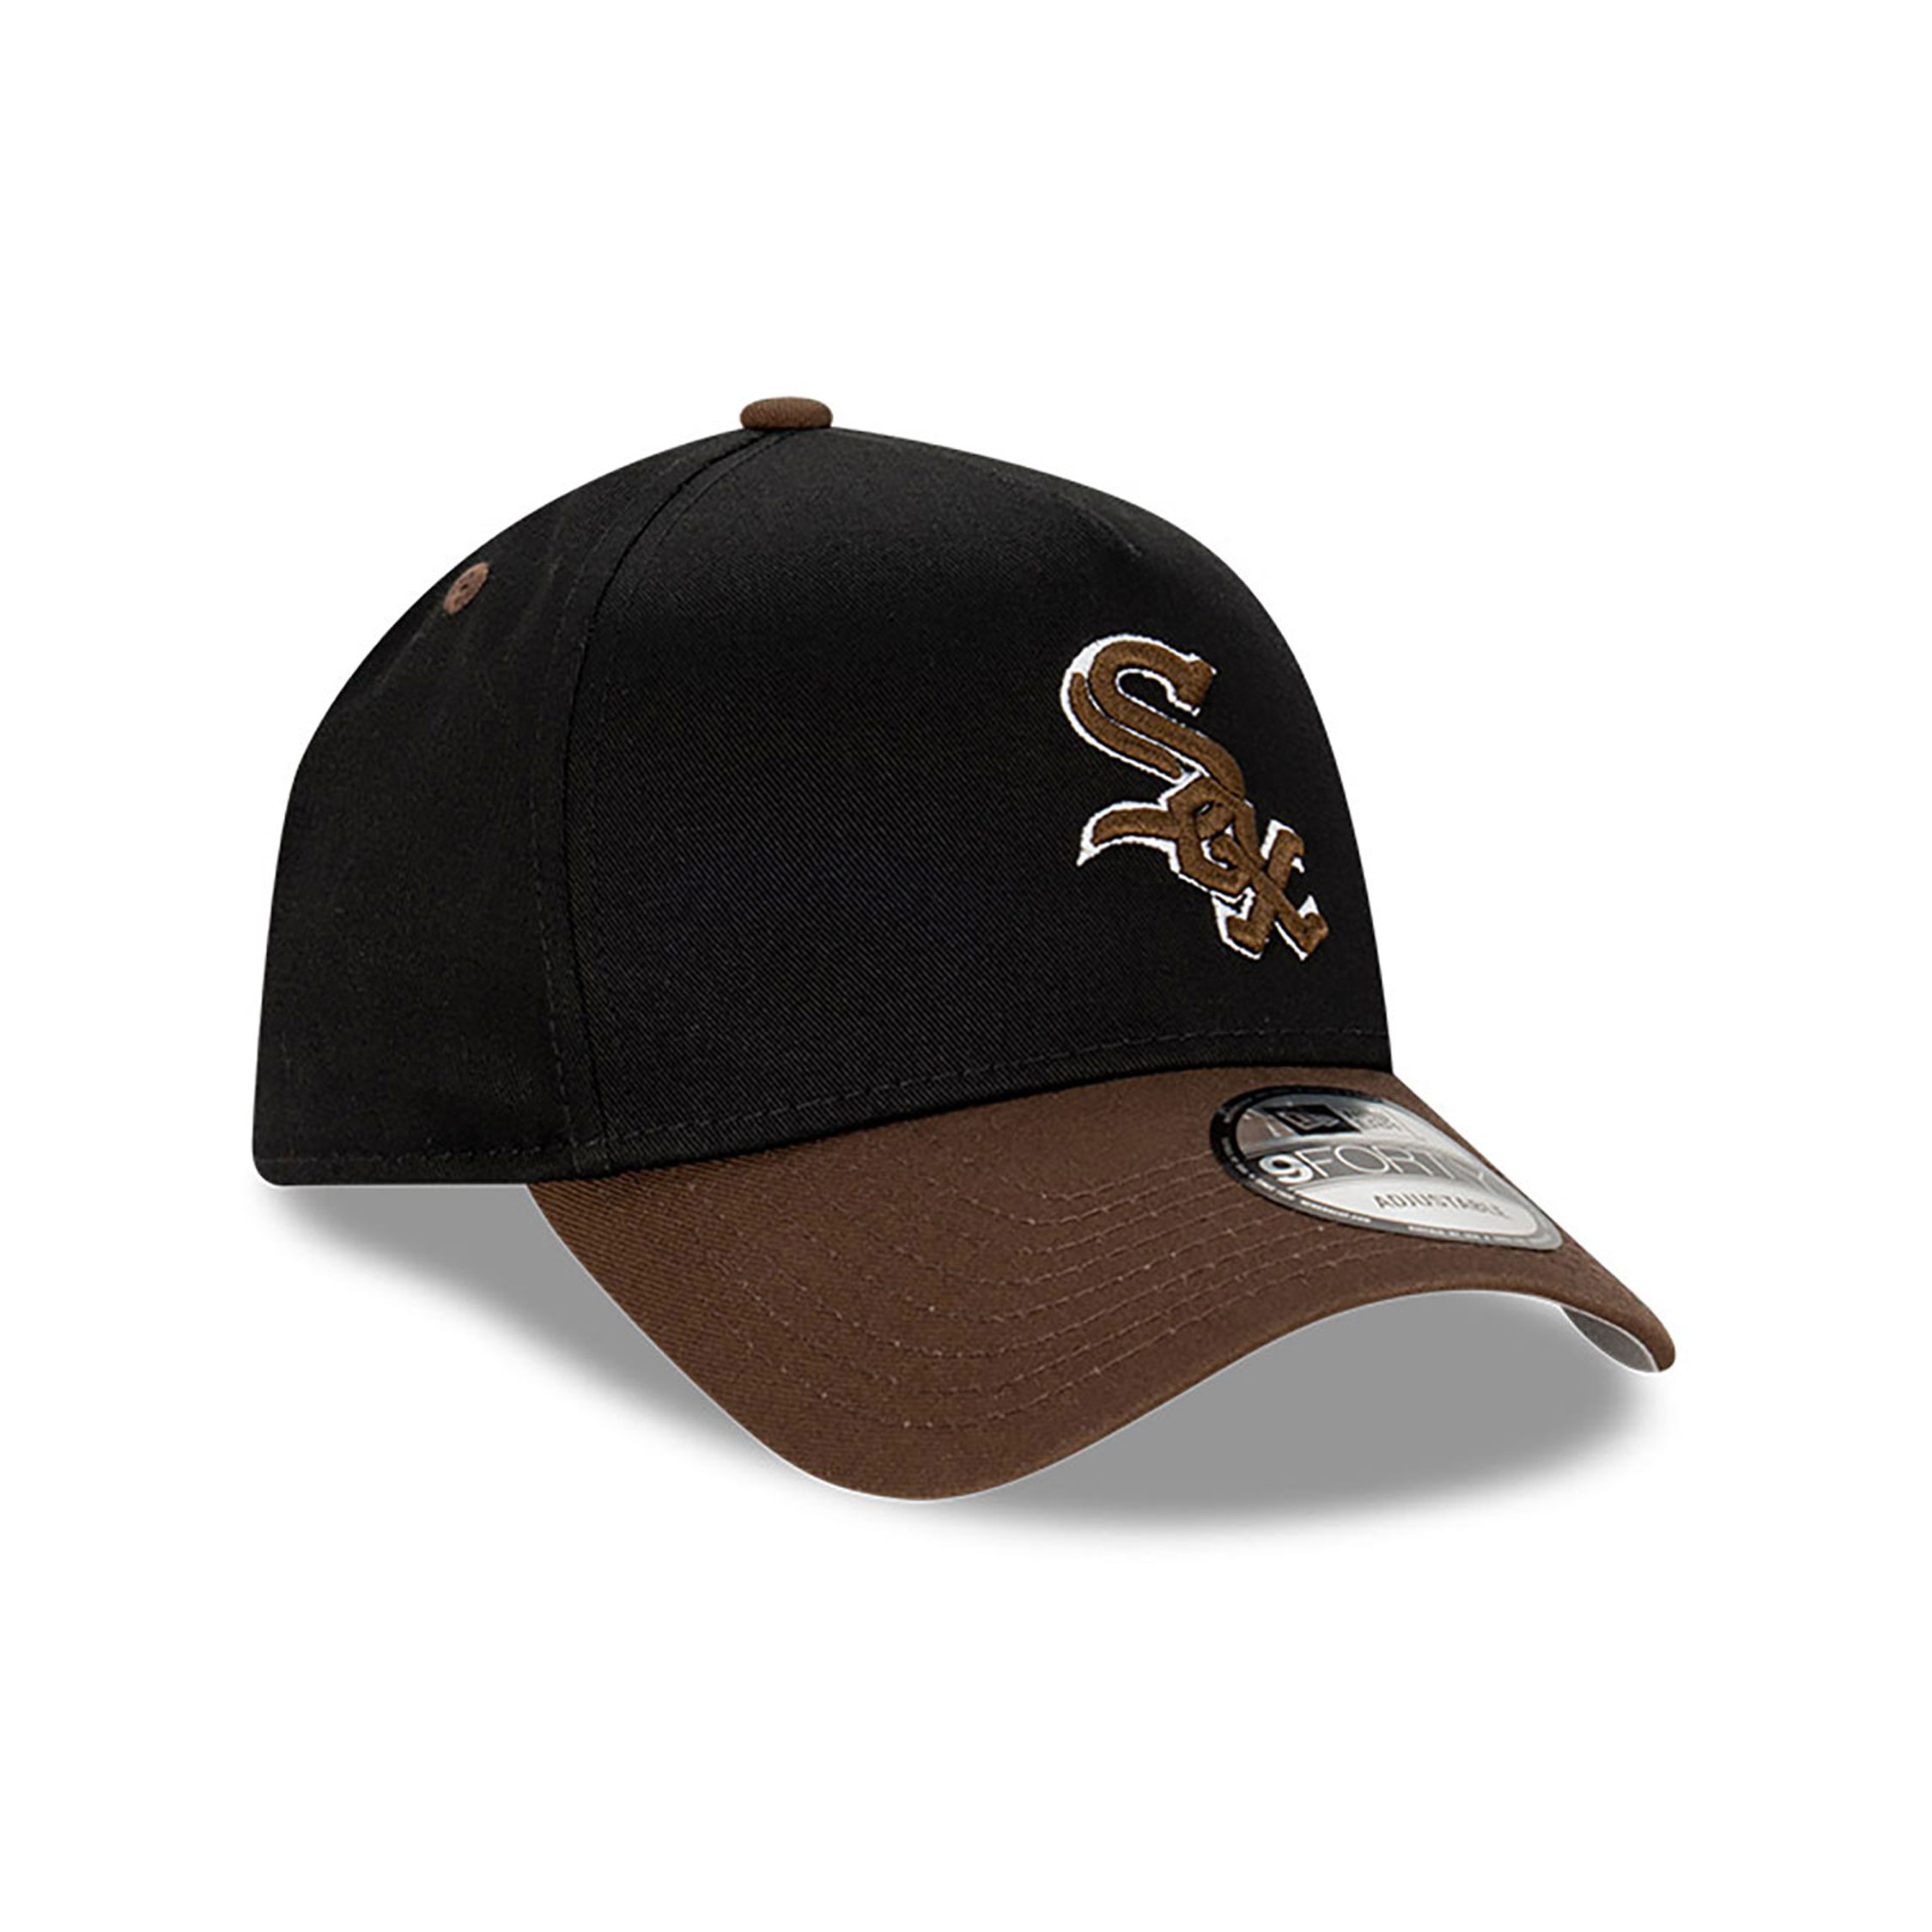 Chicago White Sox Grizzly Black 9FORTY A-Frame Adjustable Cap